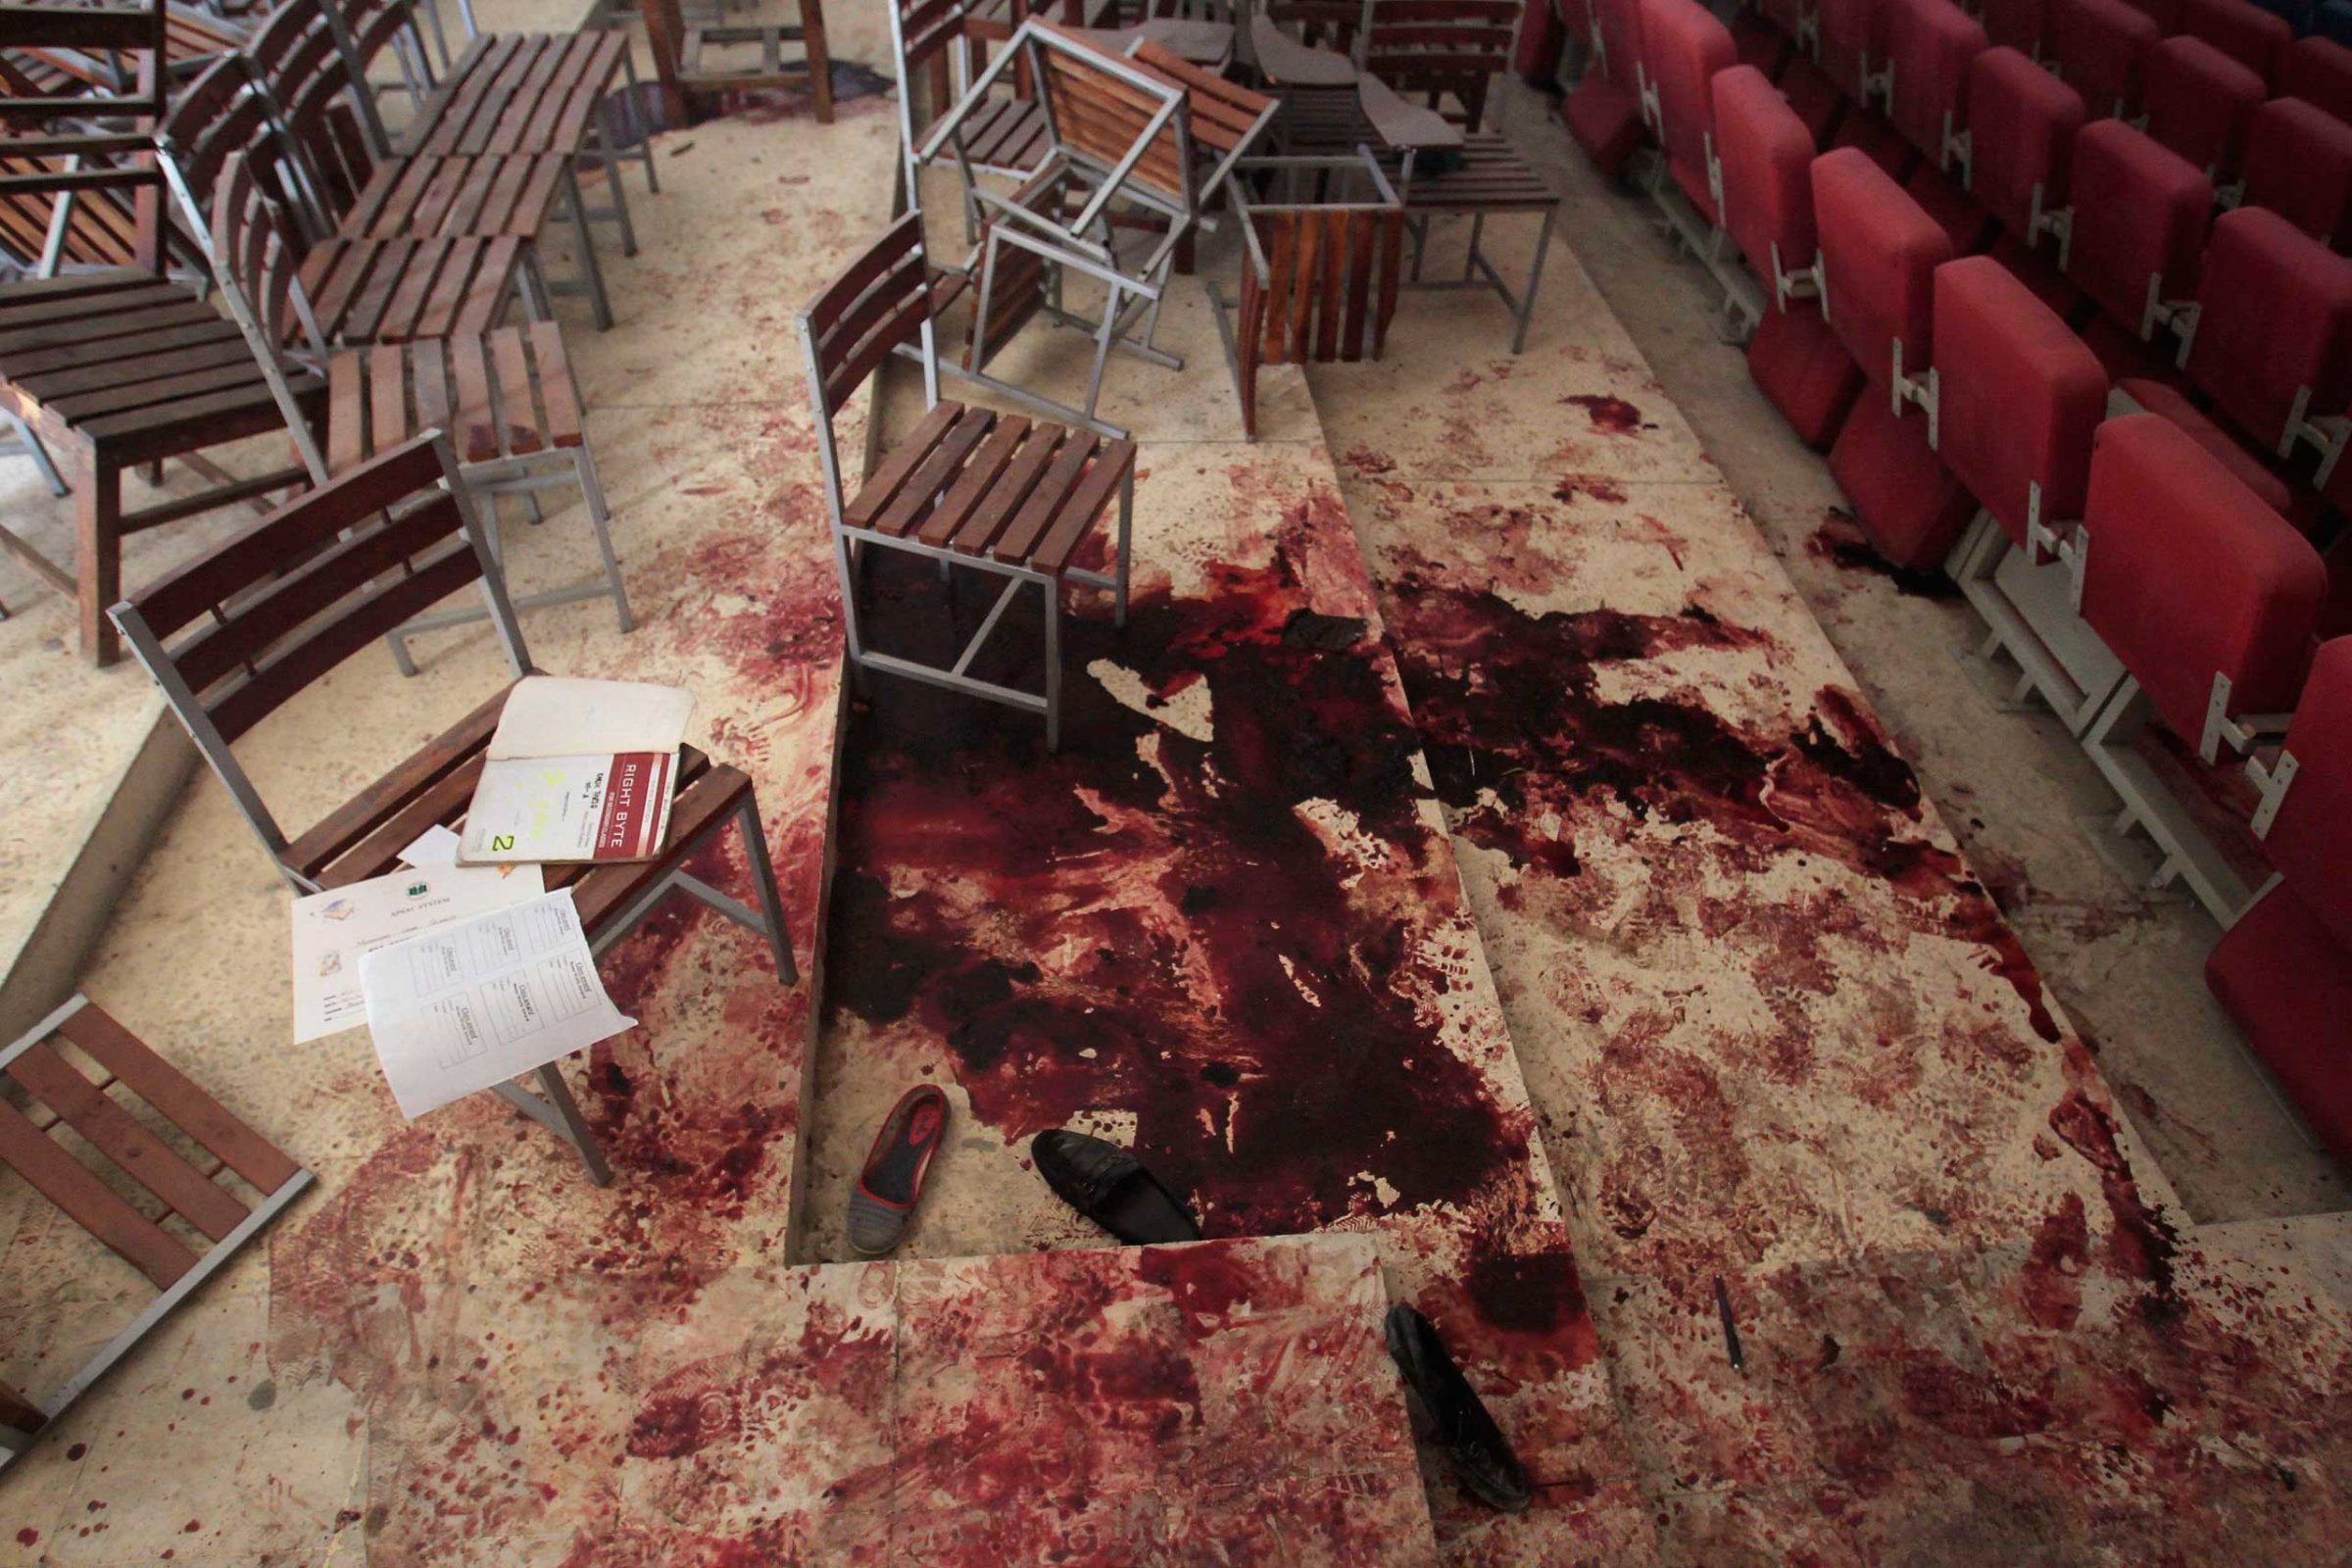 Shoes lie in blood on the auditorium floor at the Army Public School, which was attacked by Taliban gunmen, in Peshawar, Dec. 17, 2014.